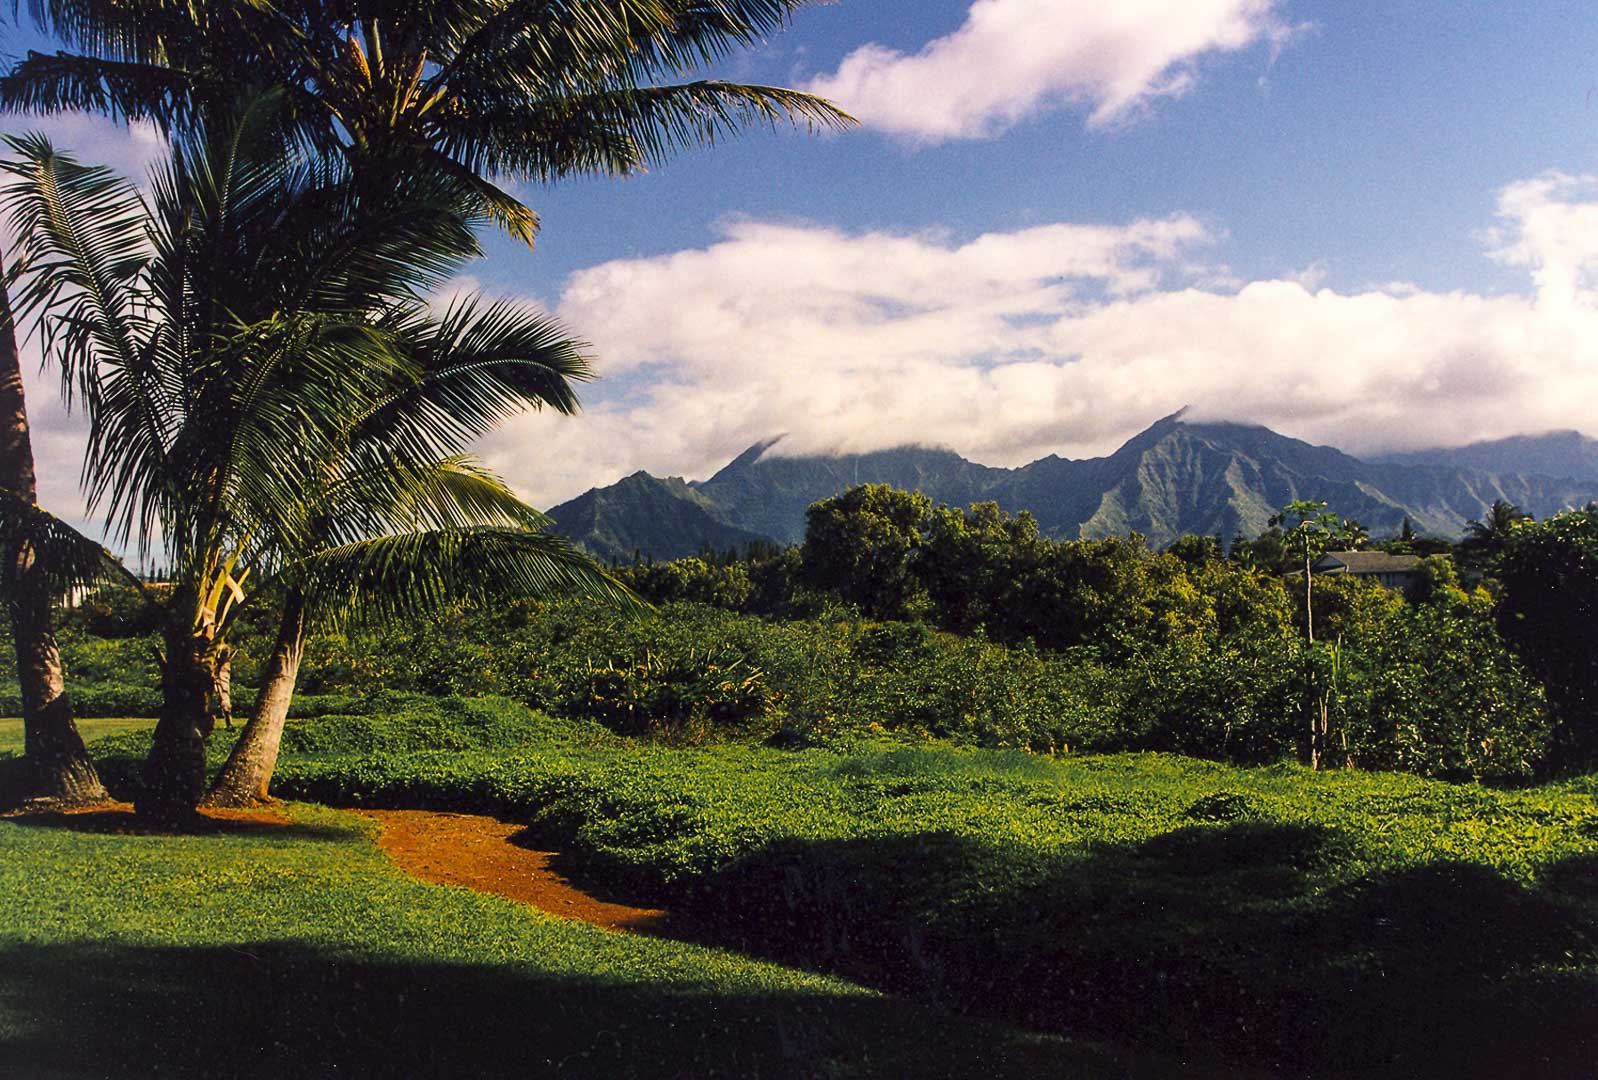 A scenic view from VRI's Alii Kai Resort in Hawaii